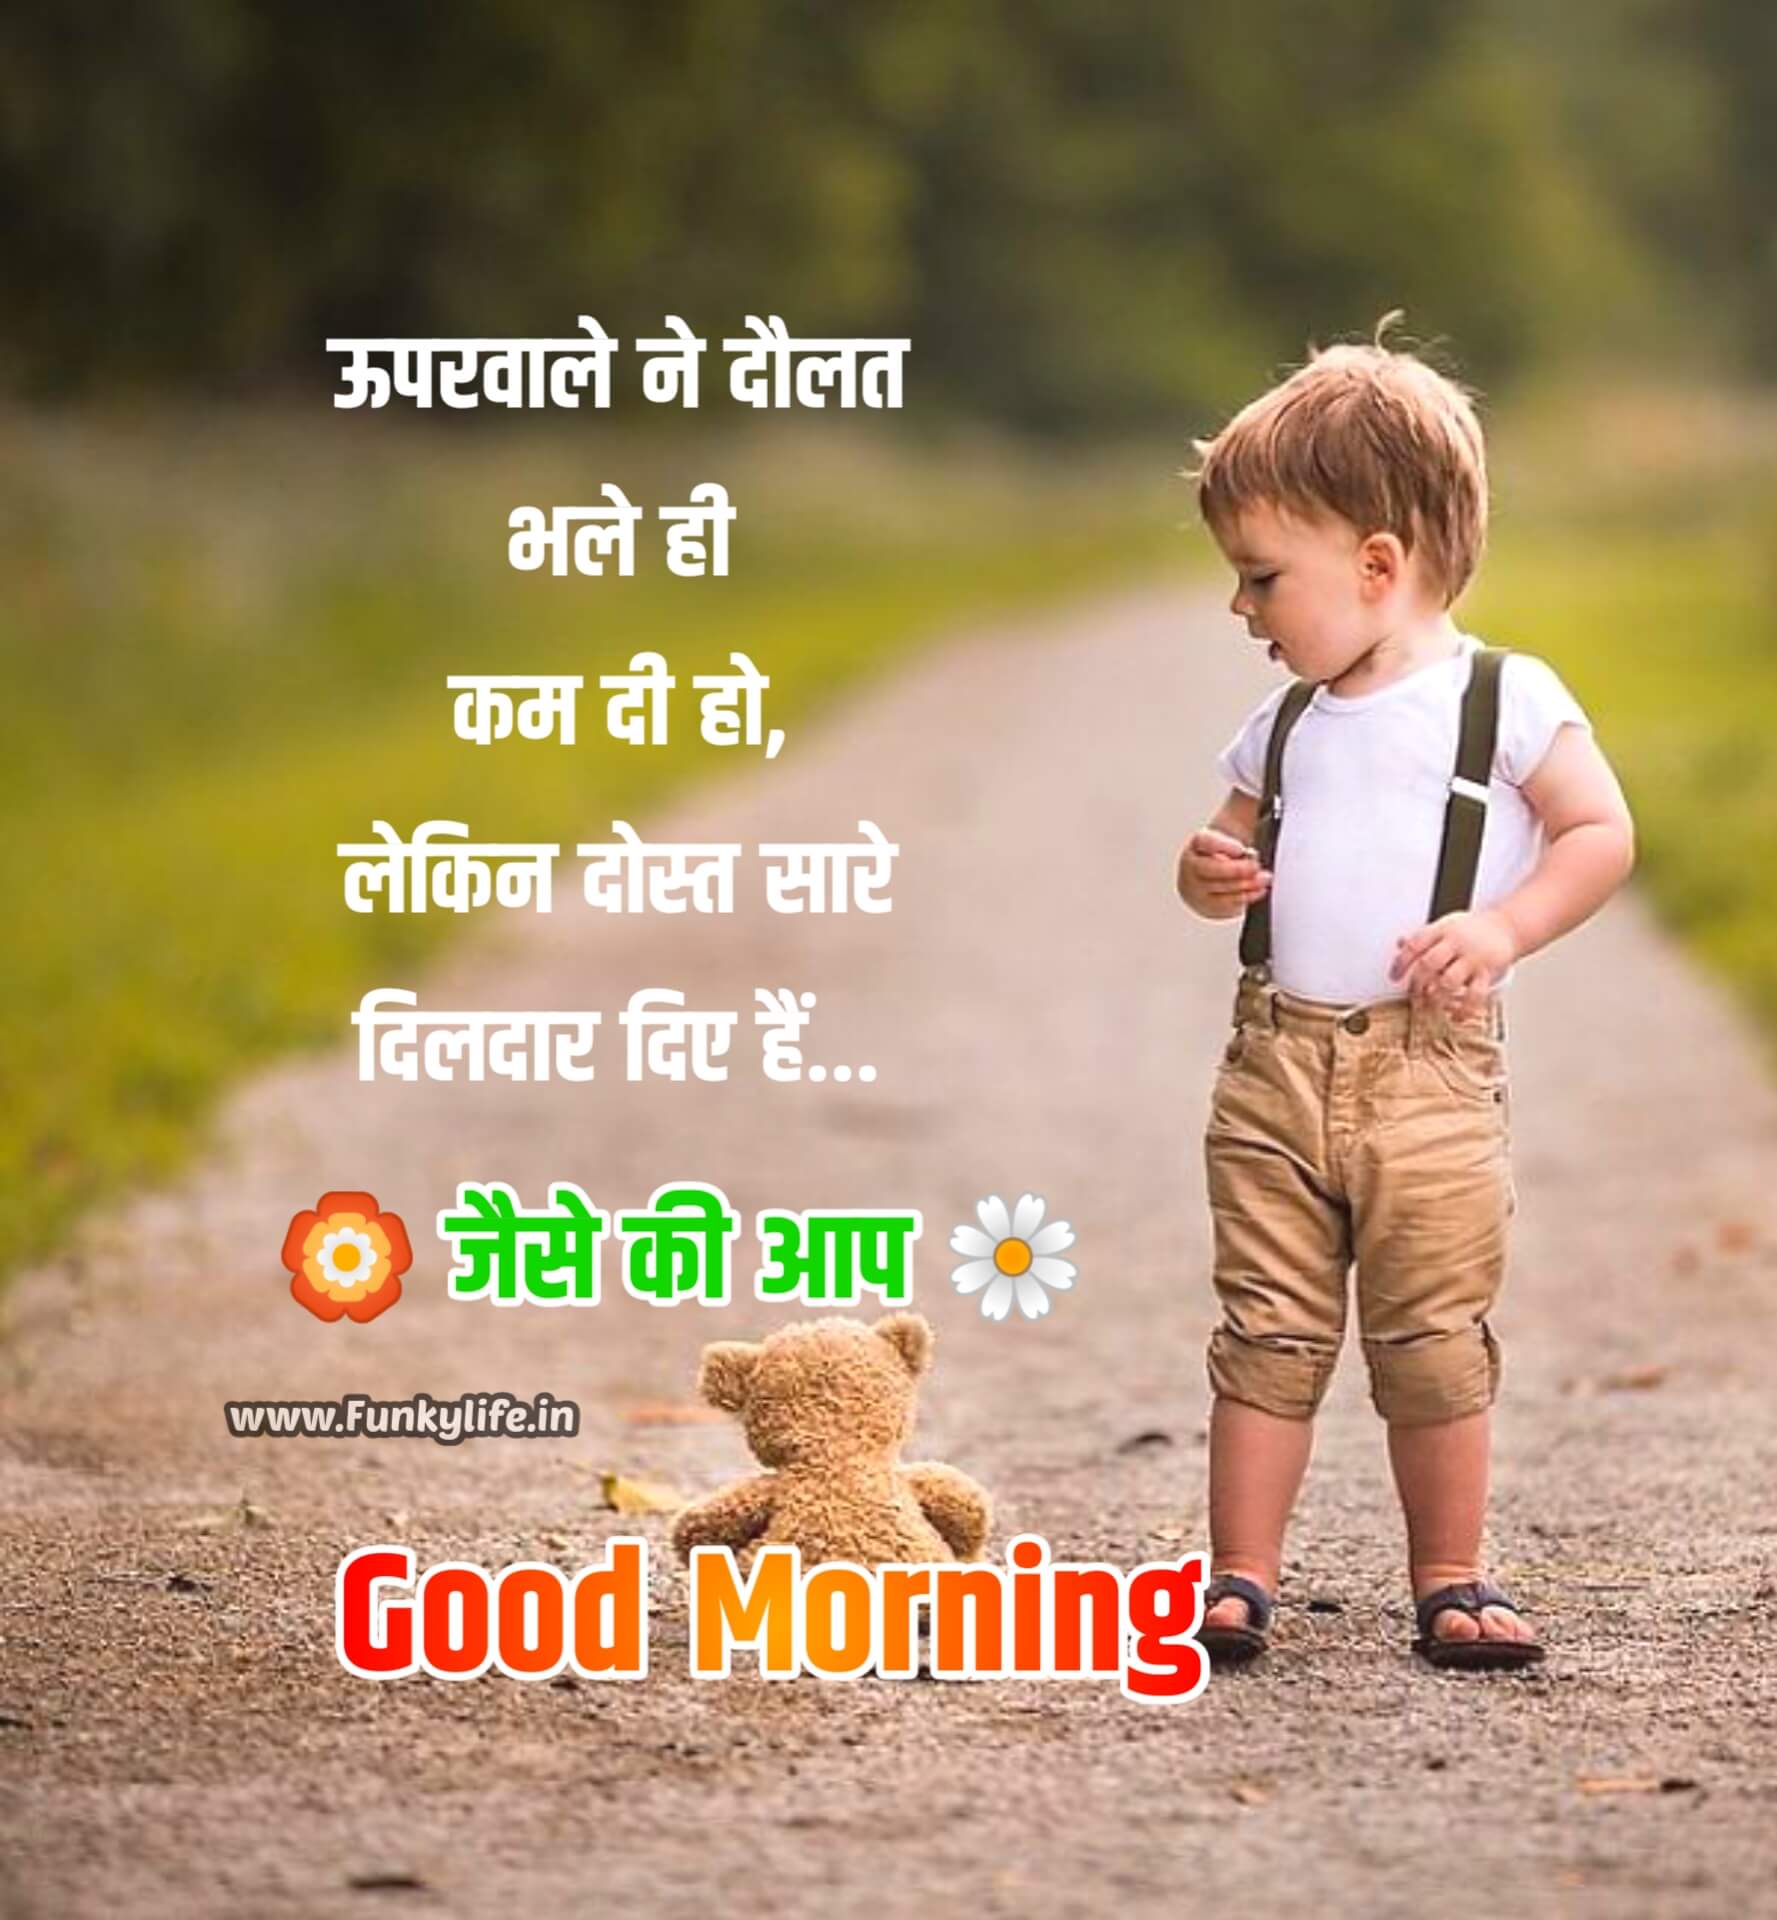 Good Morning Messages For Friends in Hindi